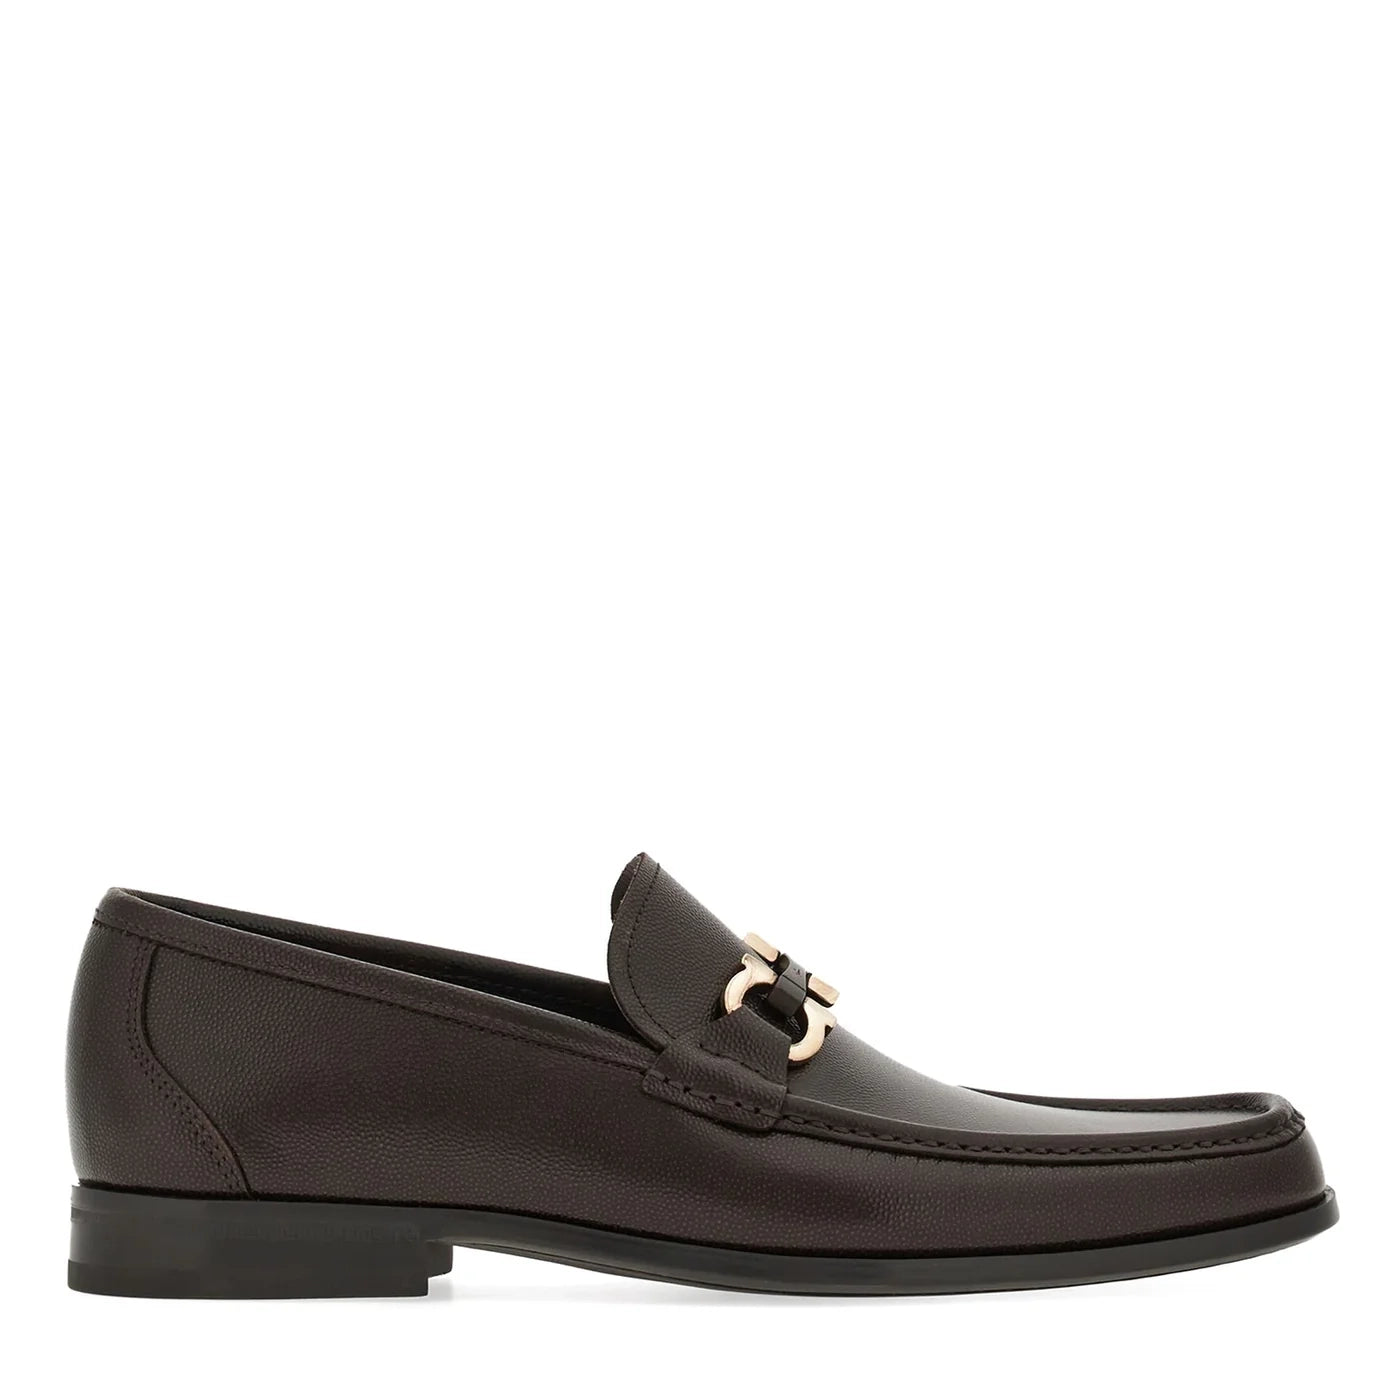 Leather Loafers for Men - Dark Brown